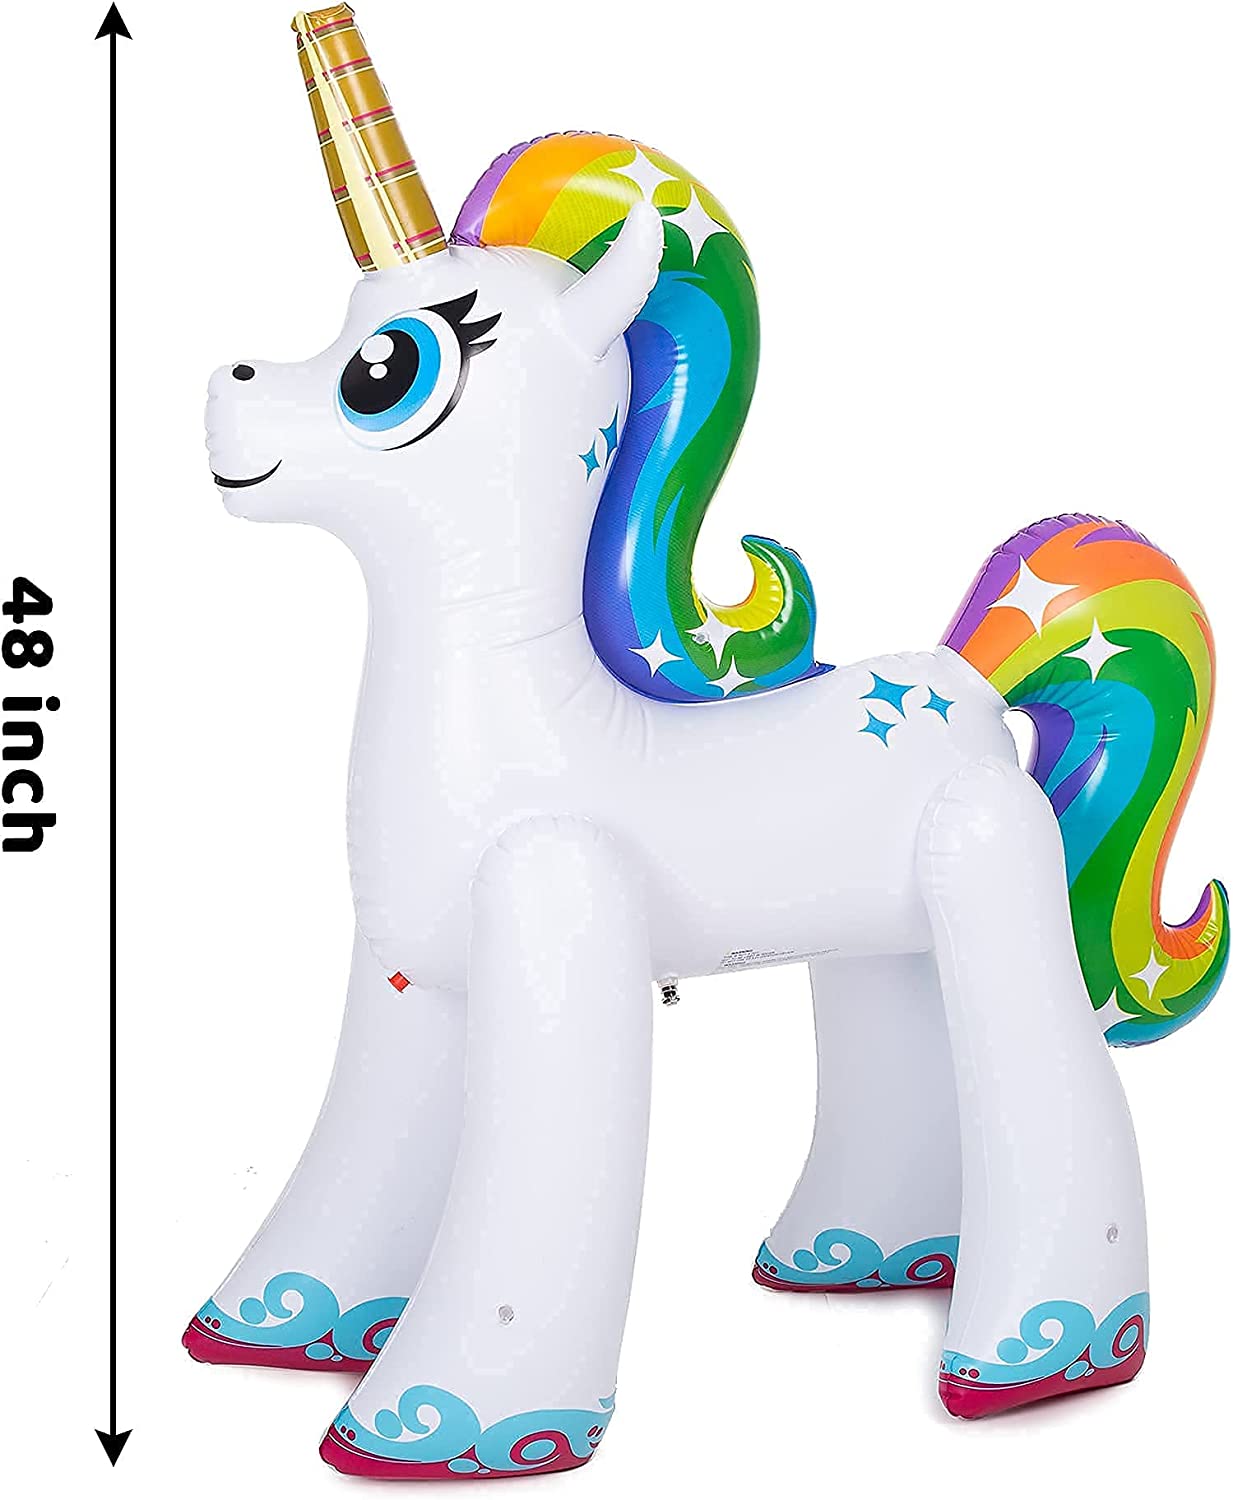 48'' Inflatable Unicorn Yard Sprinkler, Inflatable Water Toy, Summer Outdoor Fun, Lawn Sprinkler Toy for Kids